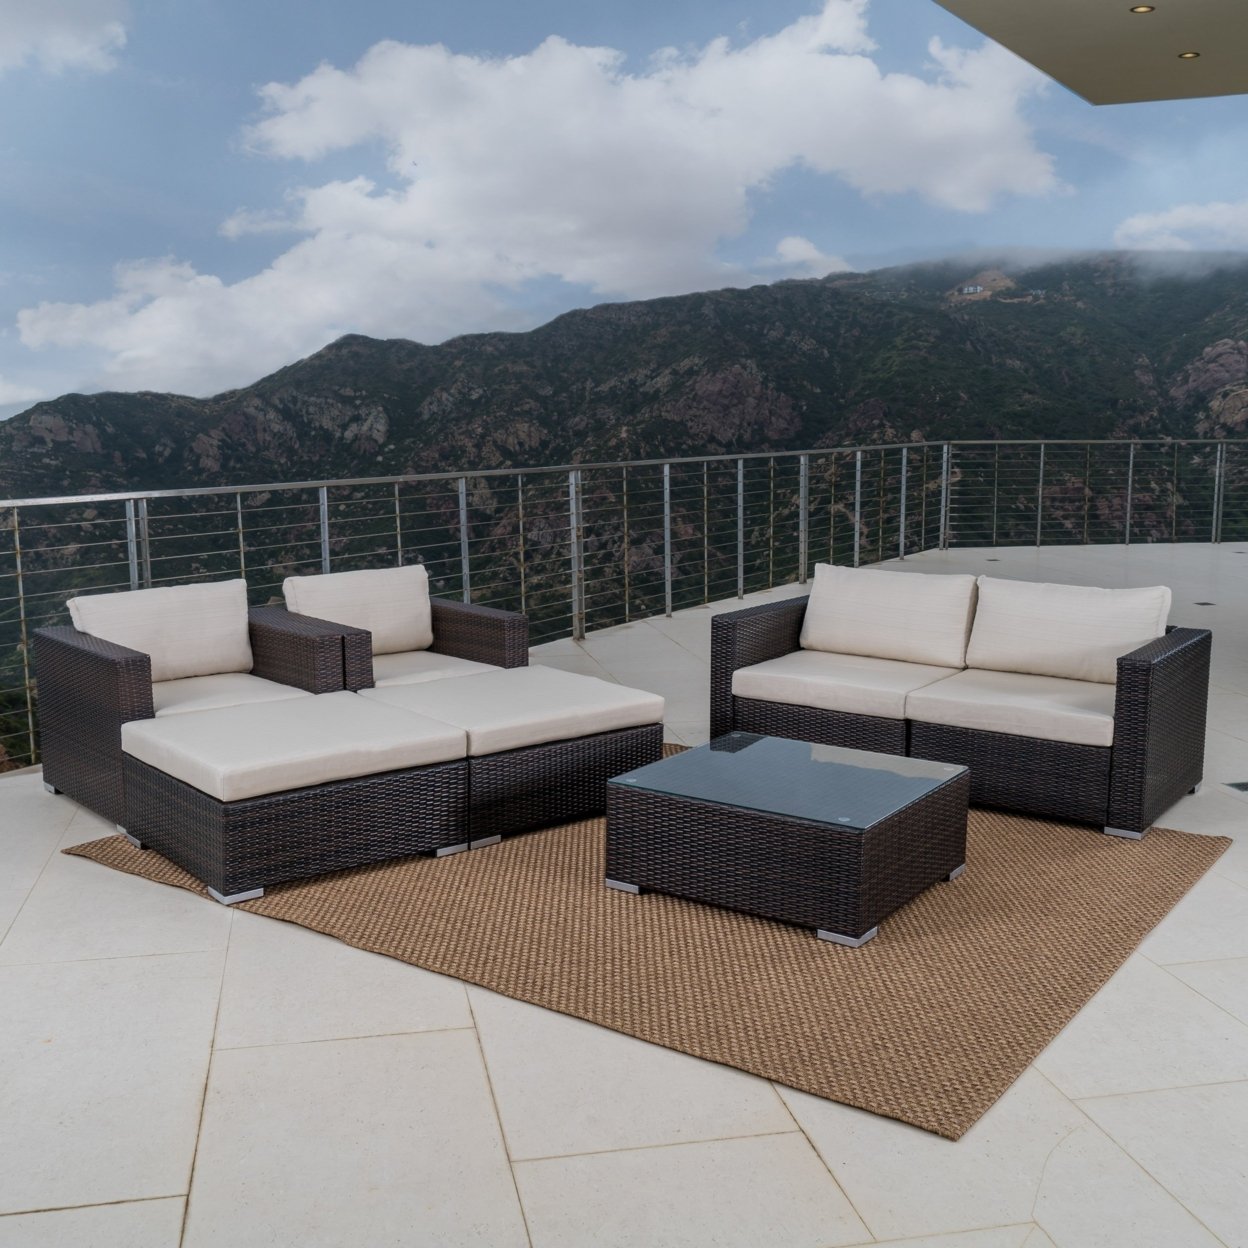 Francisco Outdoor Wicker Sectional With Cushions - Gray/Silver, 10 Piece Set